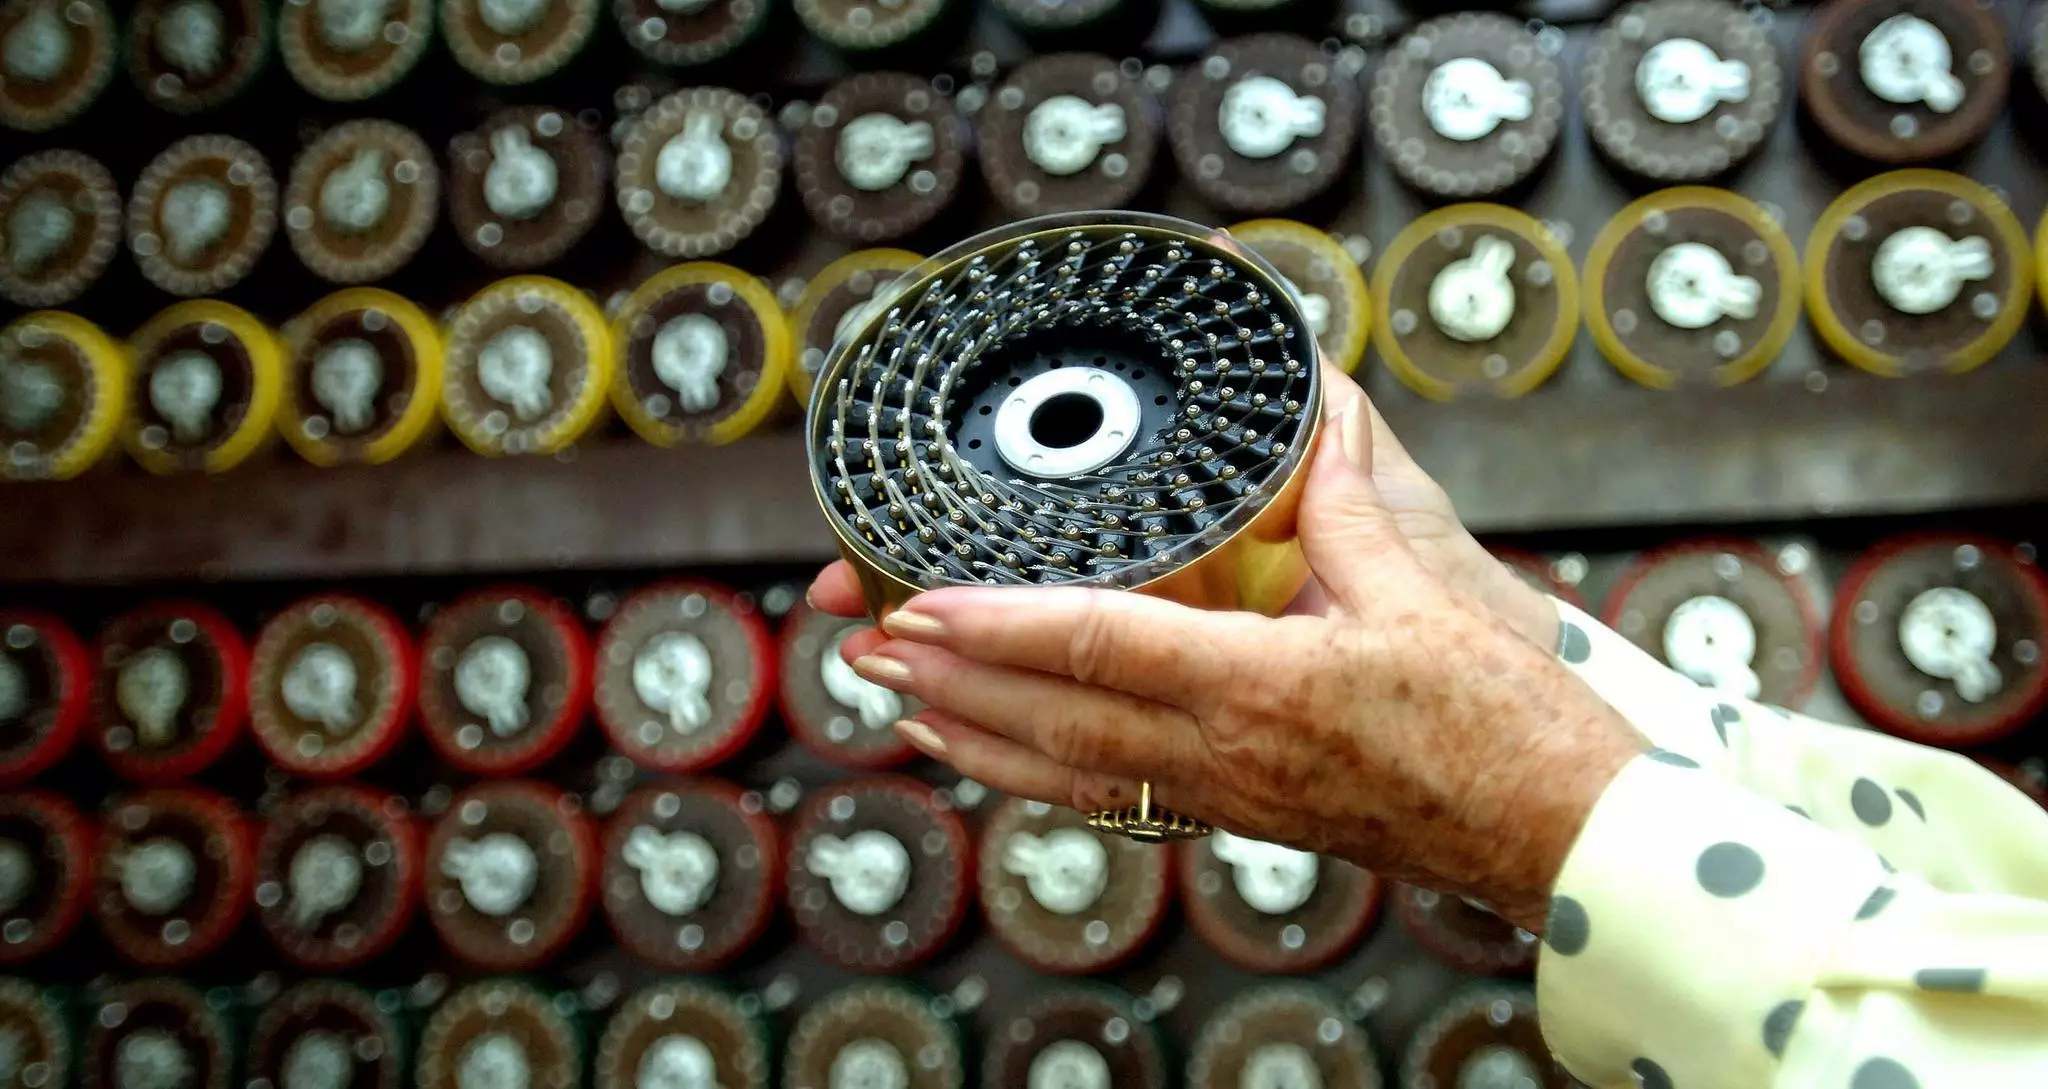 Former bombe operator Jean Valentine, 82 is reunited with a restored and fully functioning Turing Bombe.